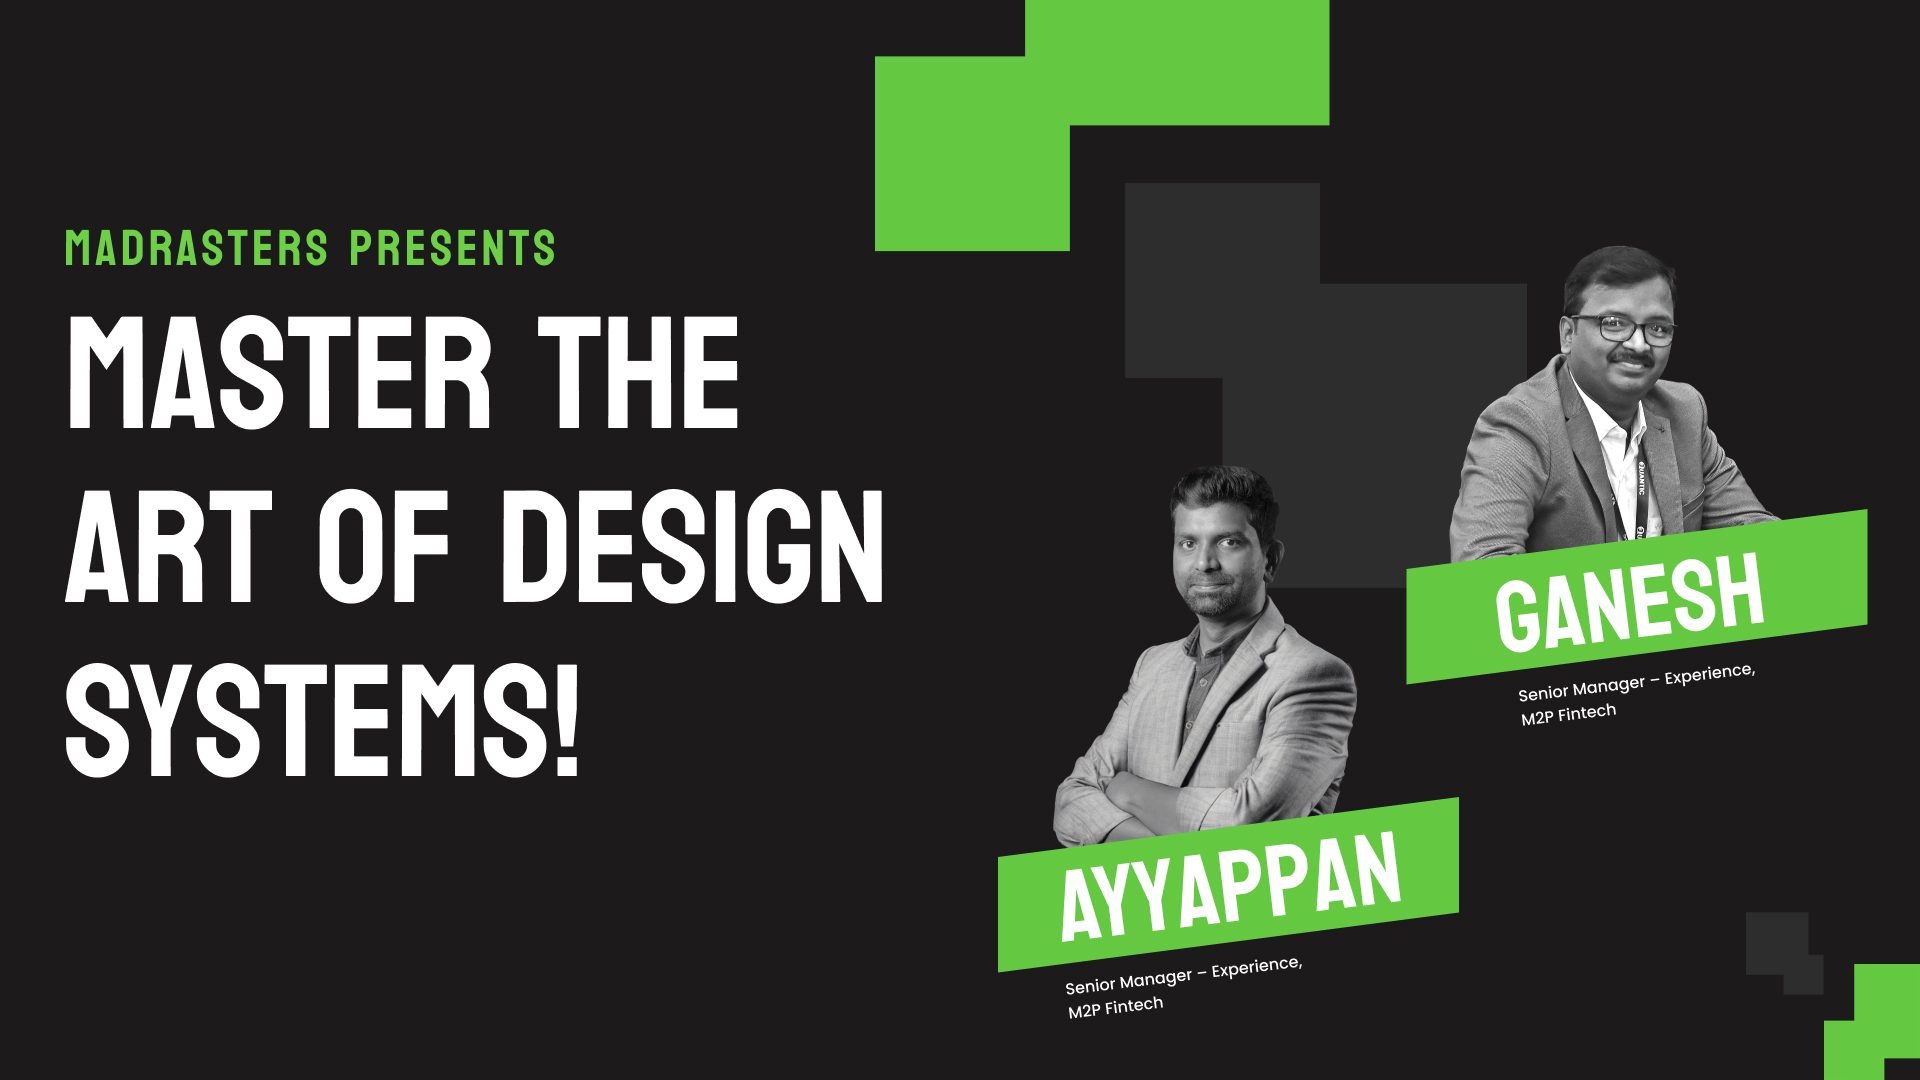 Master the Art of Design Systems!